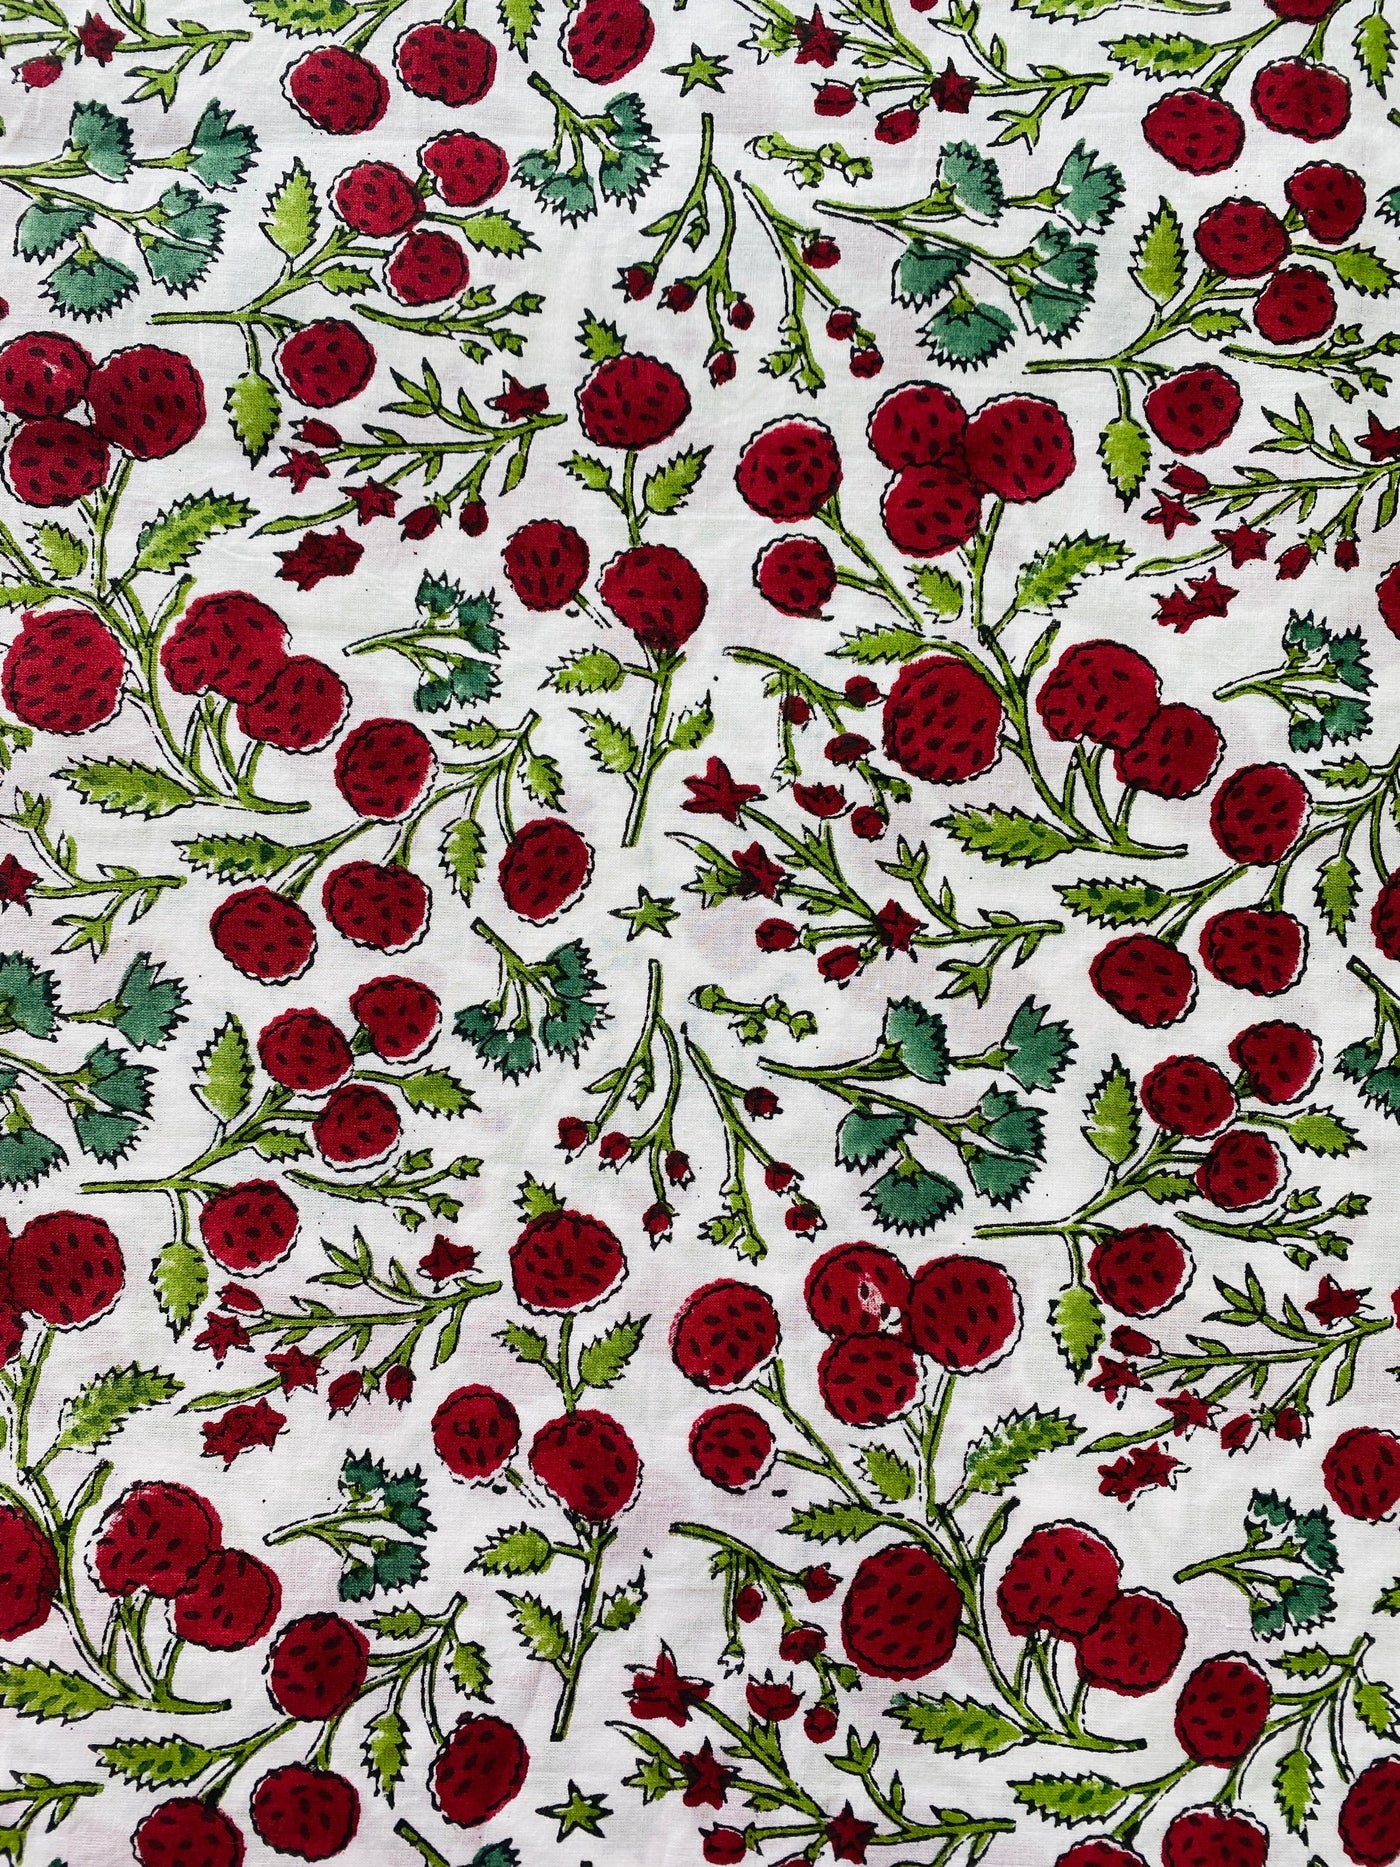 Fabricrush Garnet Red, Emerald and Moss Green Floral Indian Hand Block Print 100% Pure Cotton Cloth, Fabric by the yard, Women's Clothing Quilting Bag